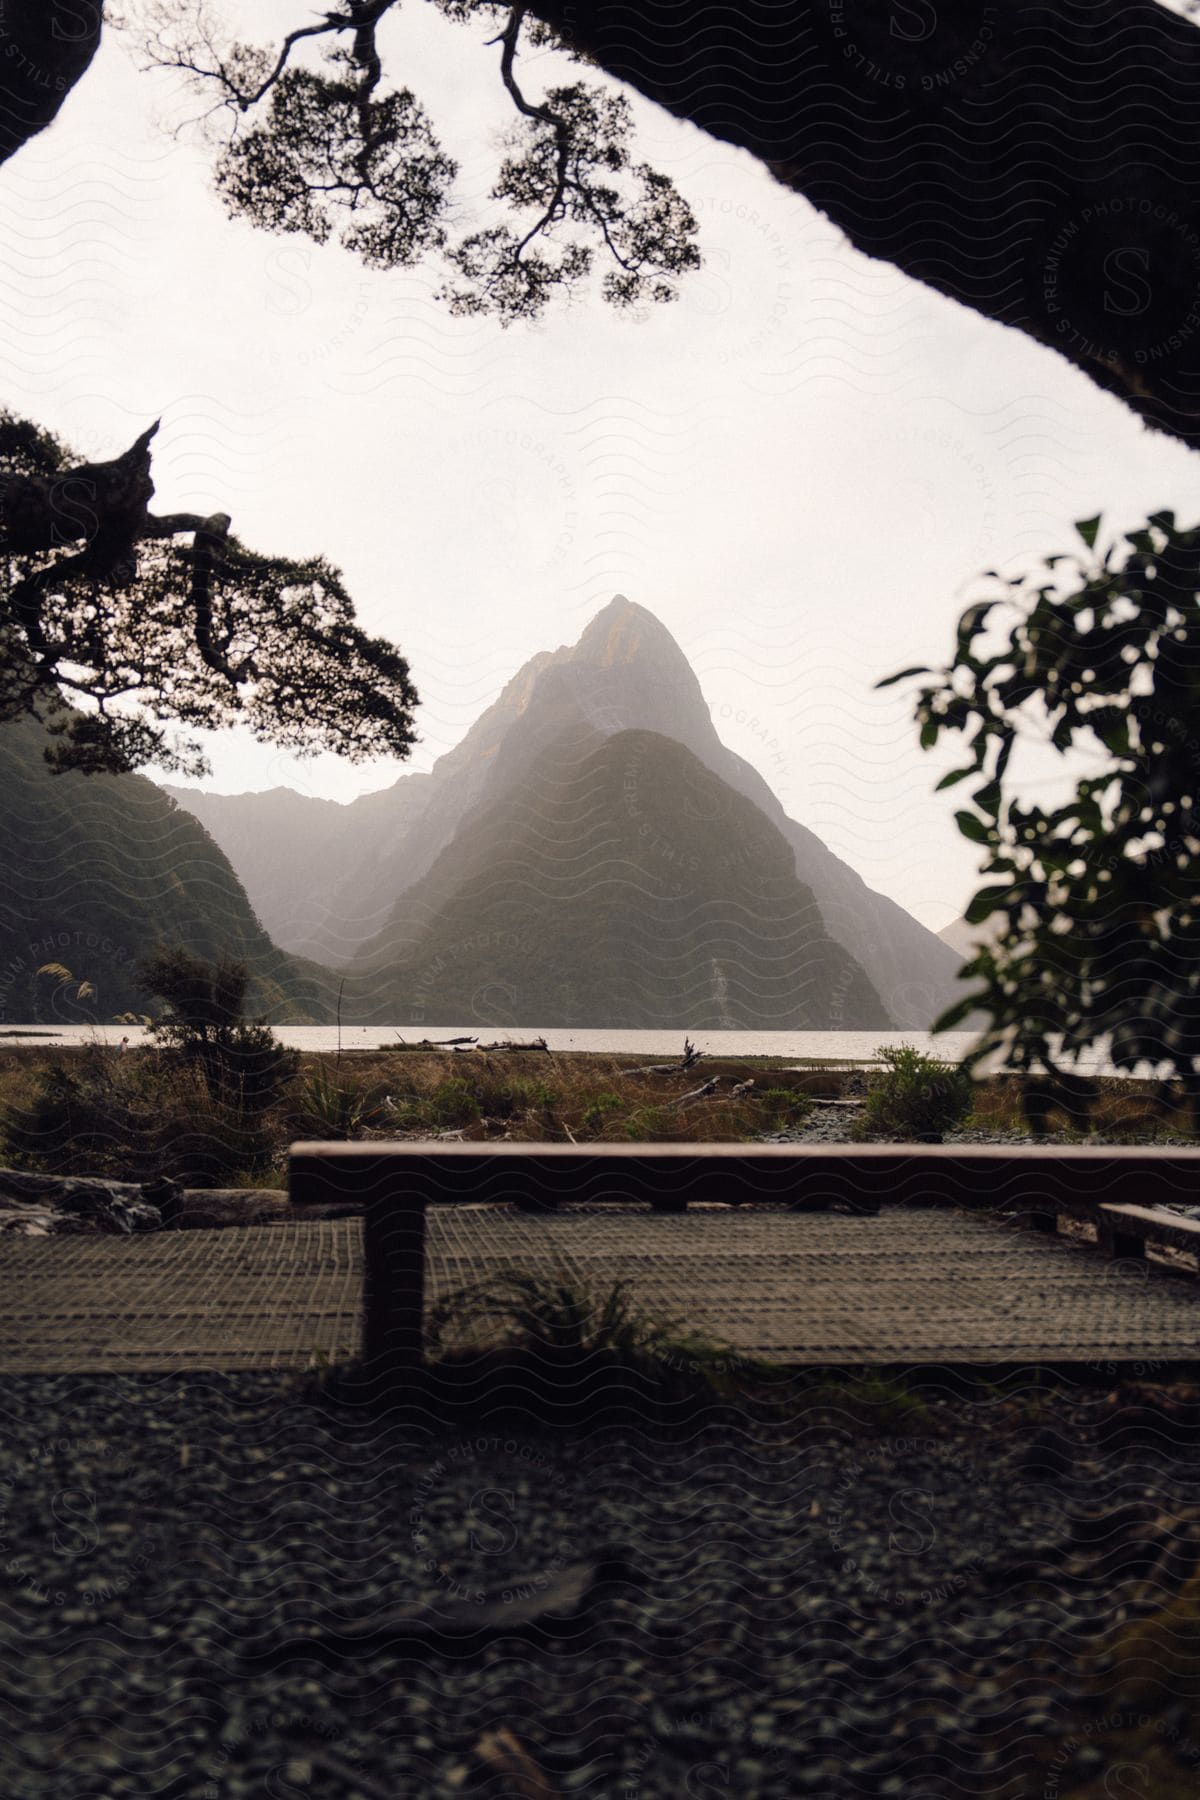 A serene view of a mountain peak framed by tree branches, with a bench in the foreground.